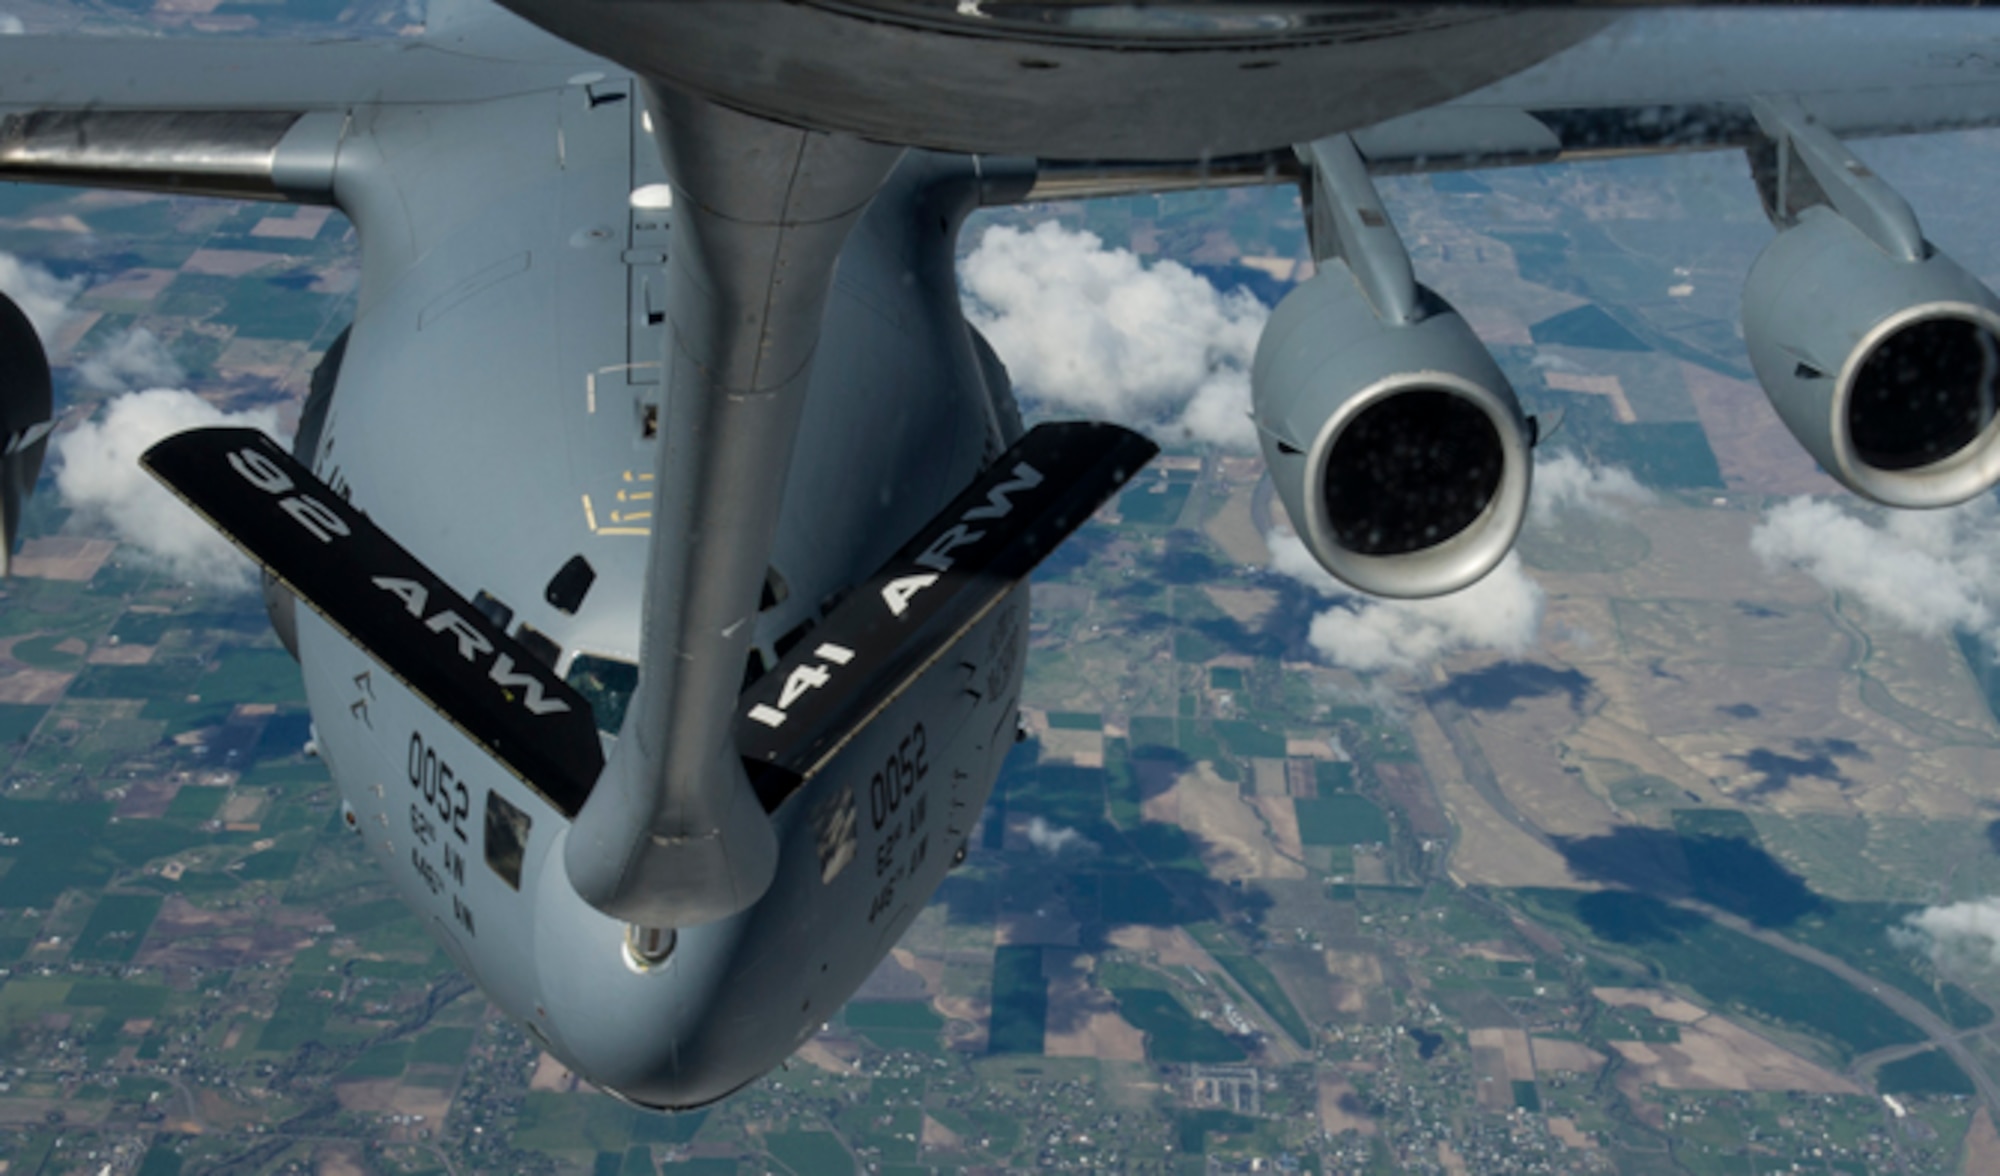 Lt. Col. Chad Marchesseault, the 92nd Operations Group deputy commander, flew a KC-135 Stratotanker from Fairchild Air Force Base, Wash., during an air refueling exercise over Washington April 5, 2016. One of the receivers, a C-17 Globemaster hailing from Joint Base Lewis-McChord, Wash., was flown by Chad’s youngest brother, Capt. Lance Marchesseault, the 62nd Operations Support Squadron airlift director. (U.S. Air Force photo/Airman 1st Class Sean Campbell)